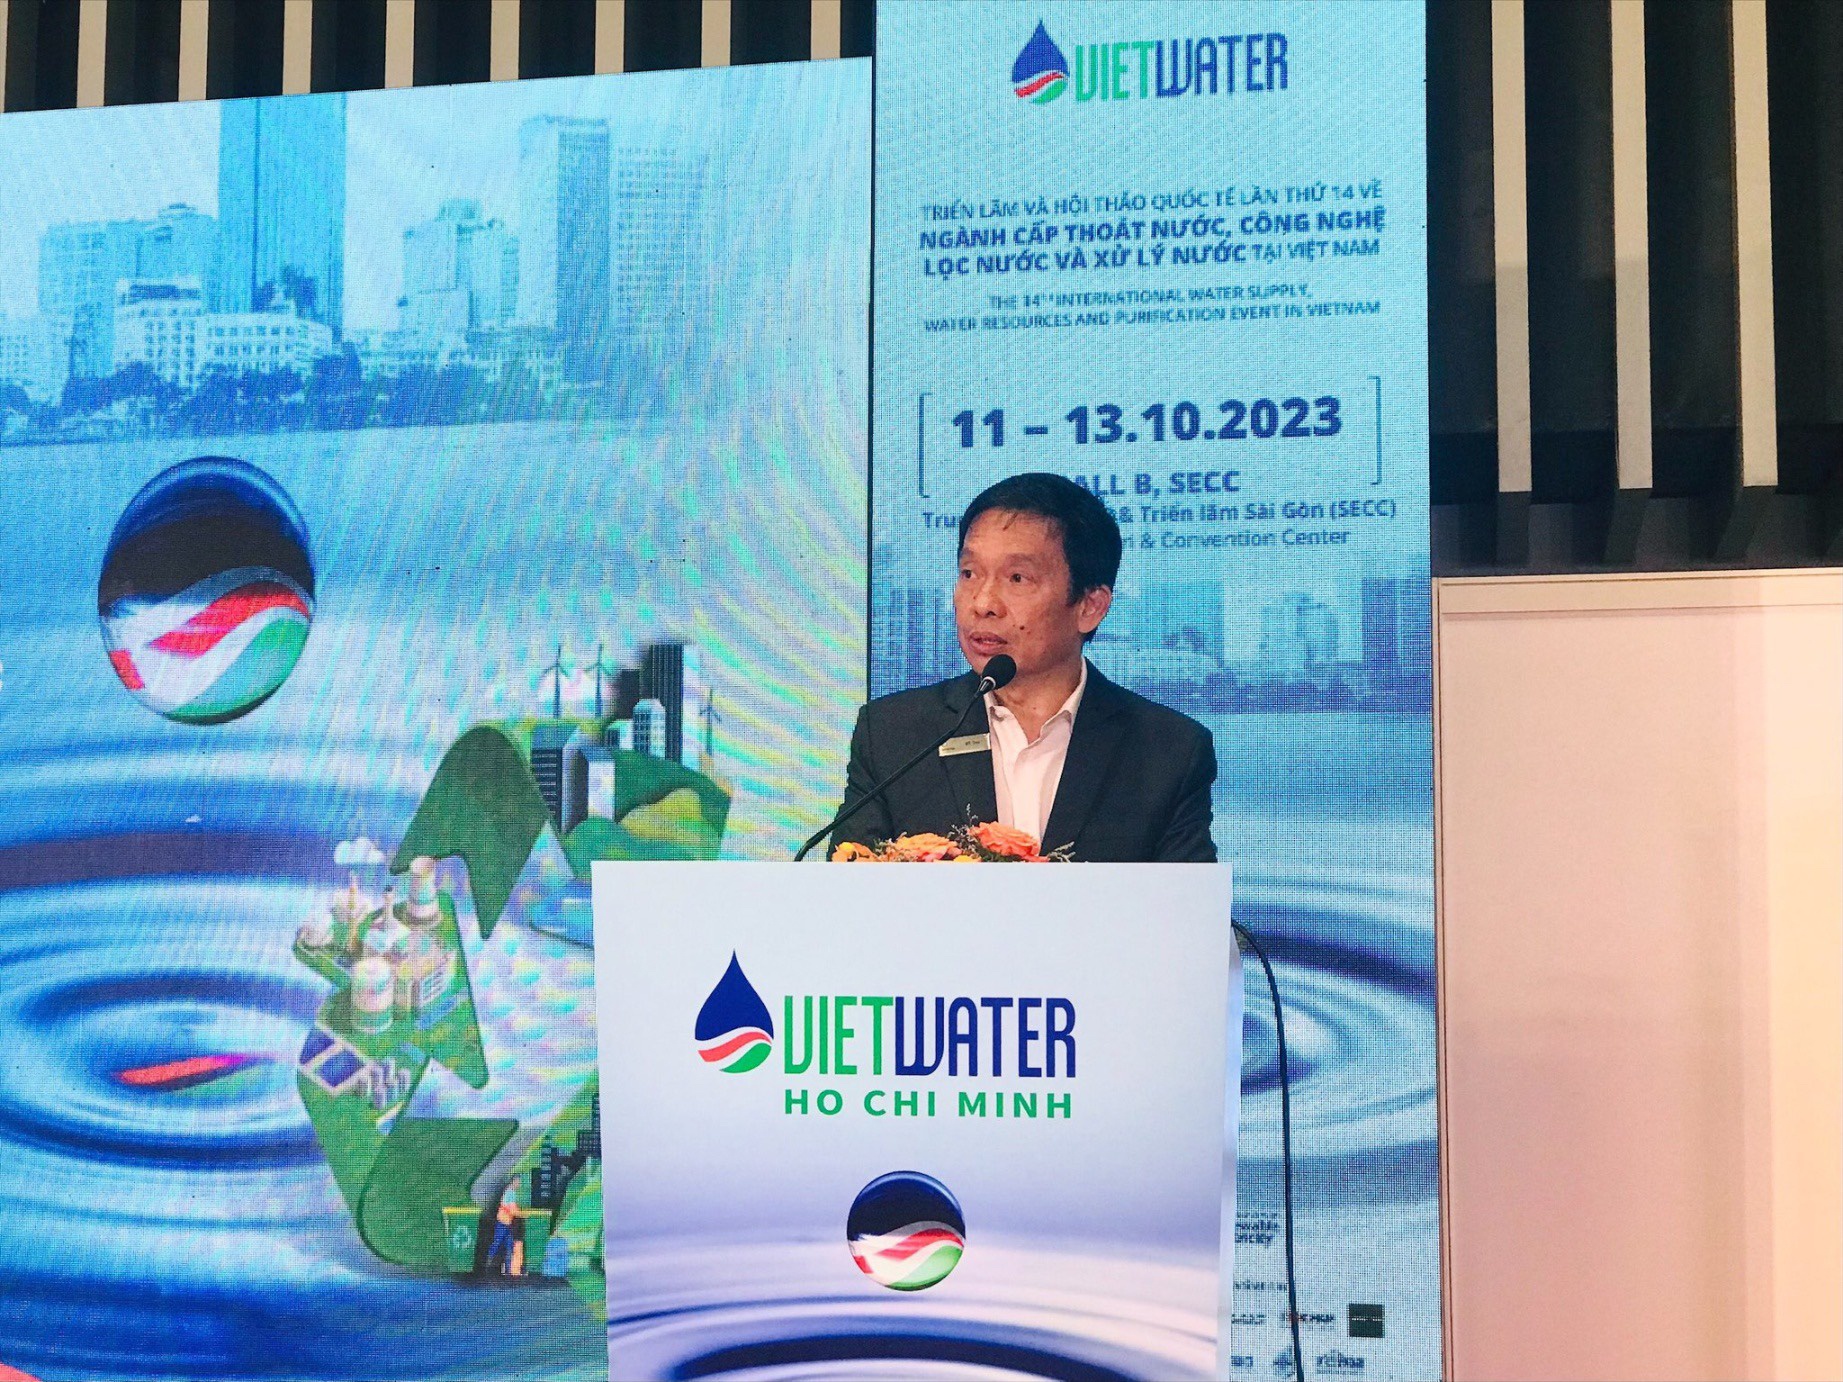 Vietwater 2023 taking place from October 11-13